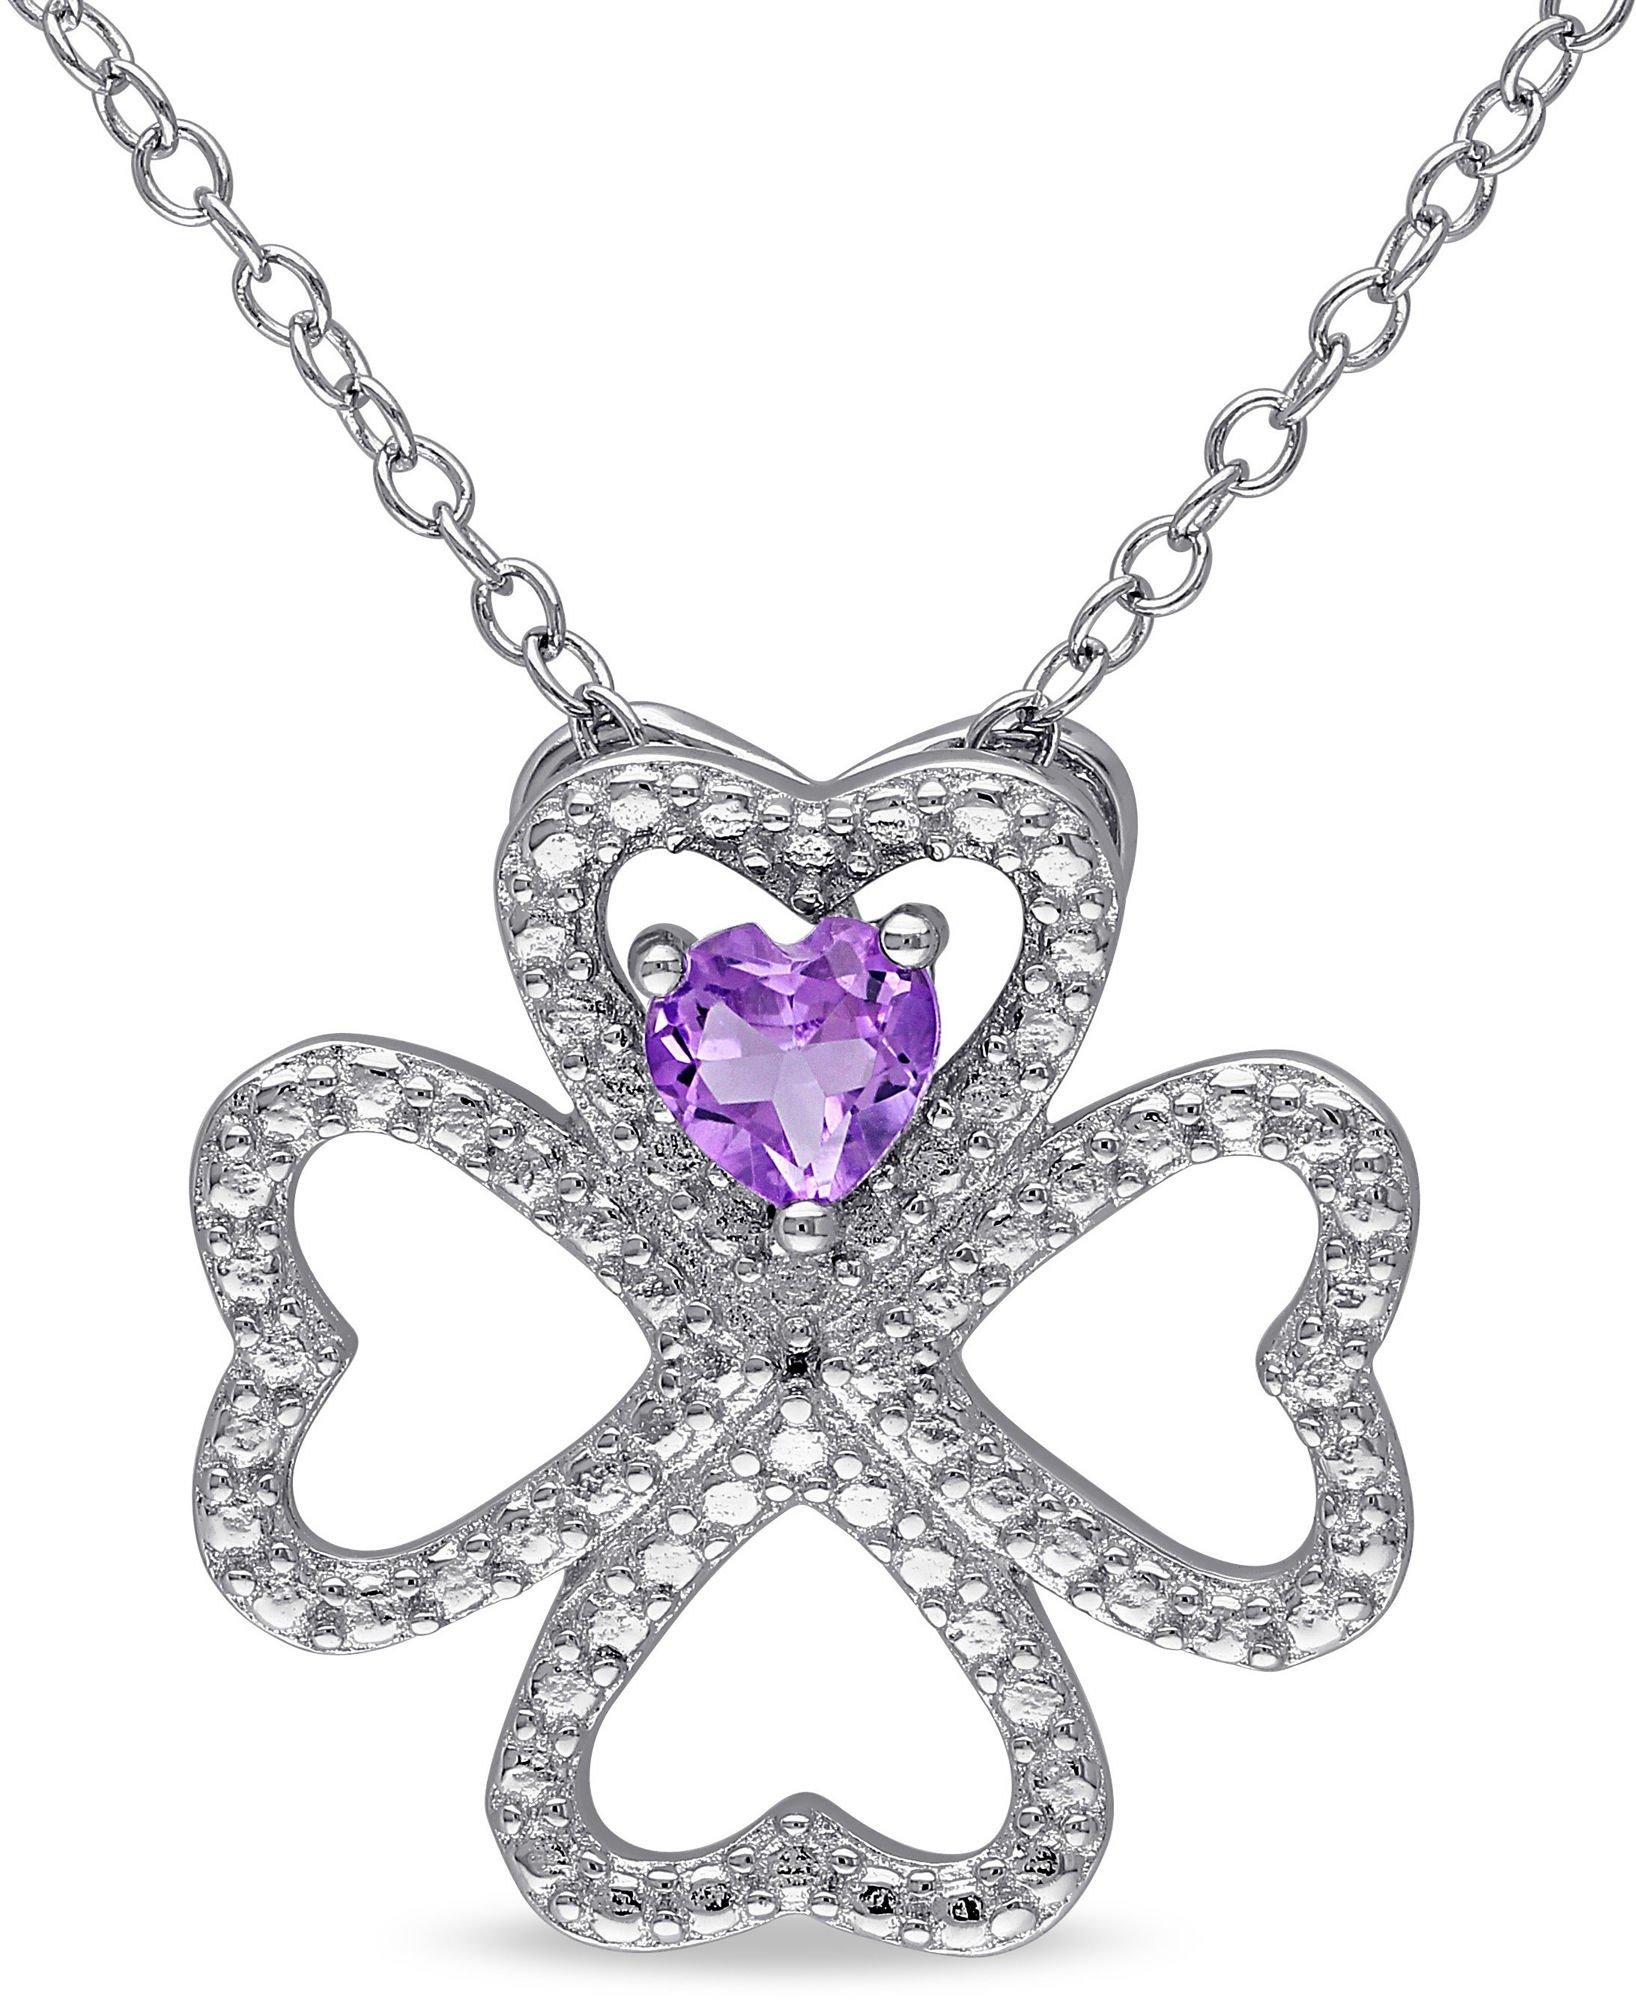 1/3-ct. T.G.W. Amethyst Clover Necklace